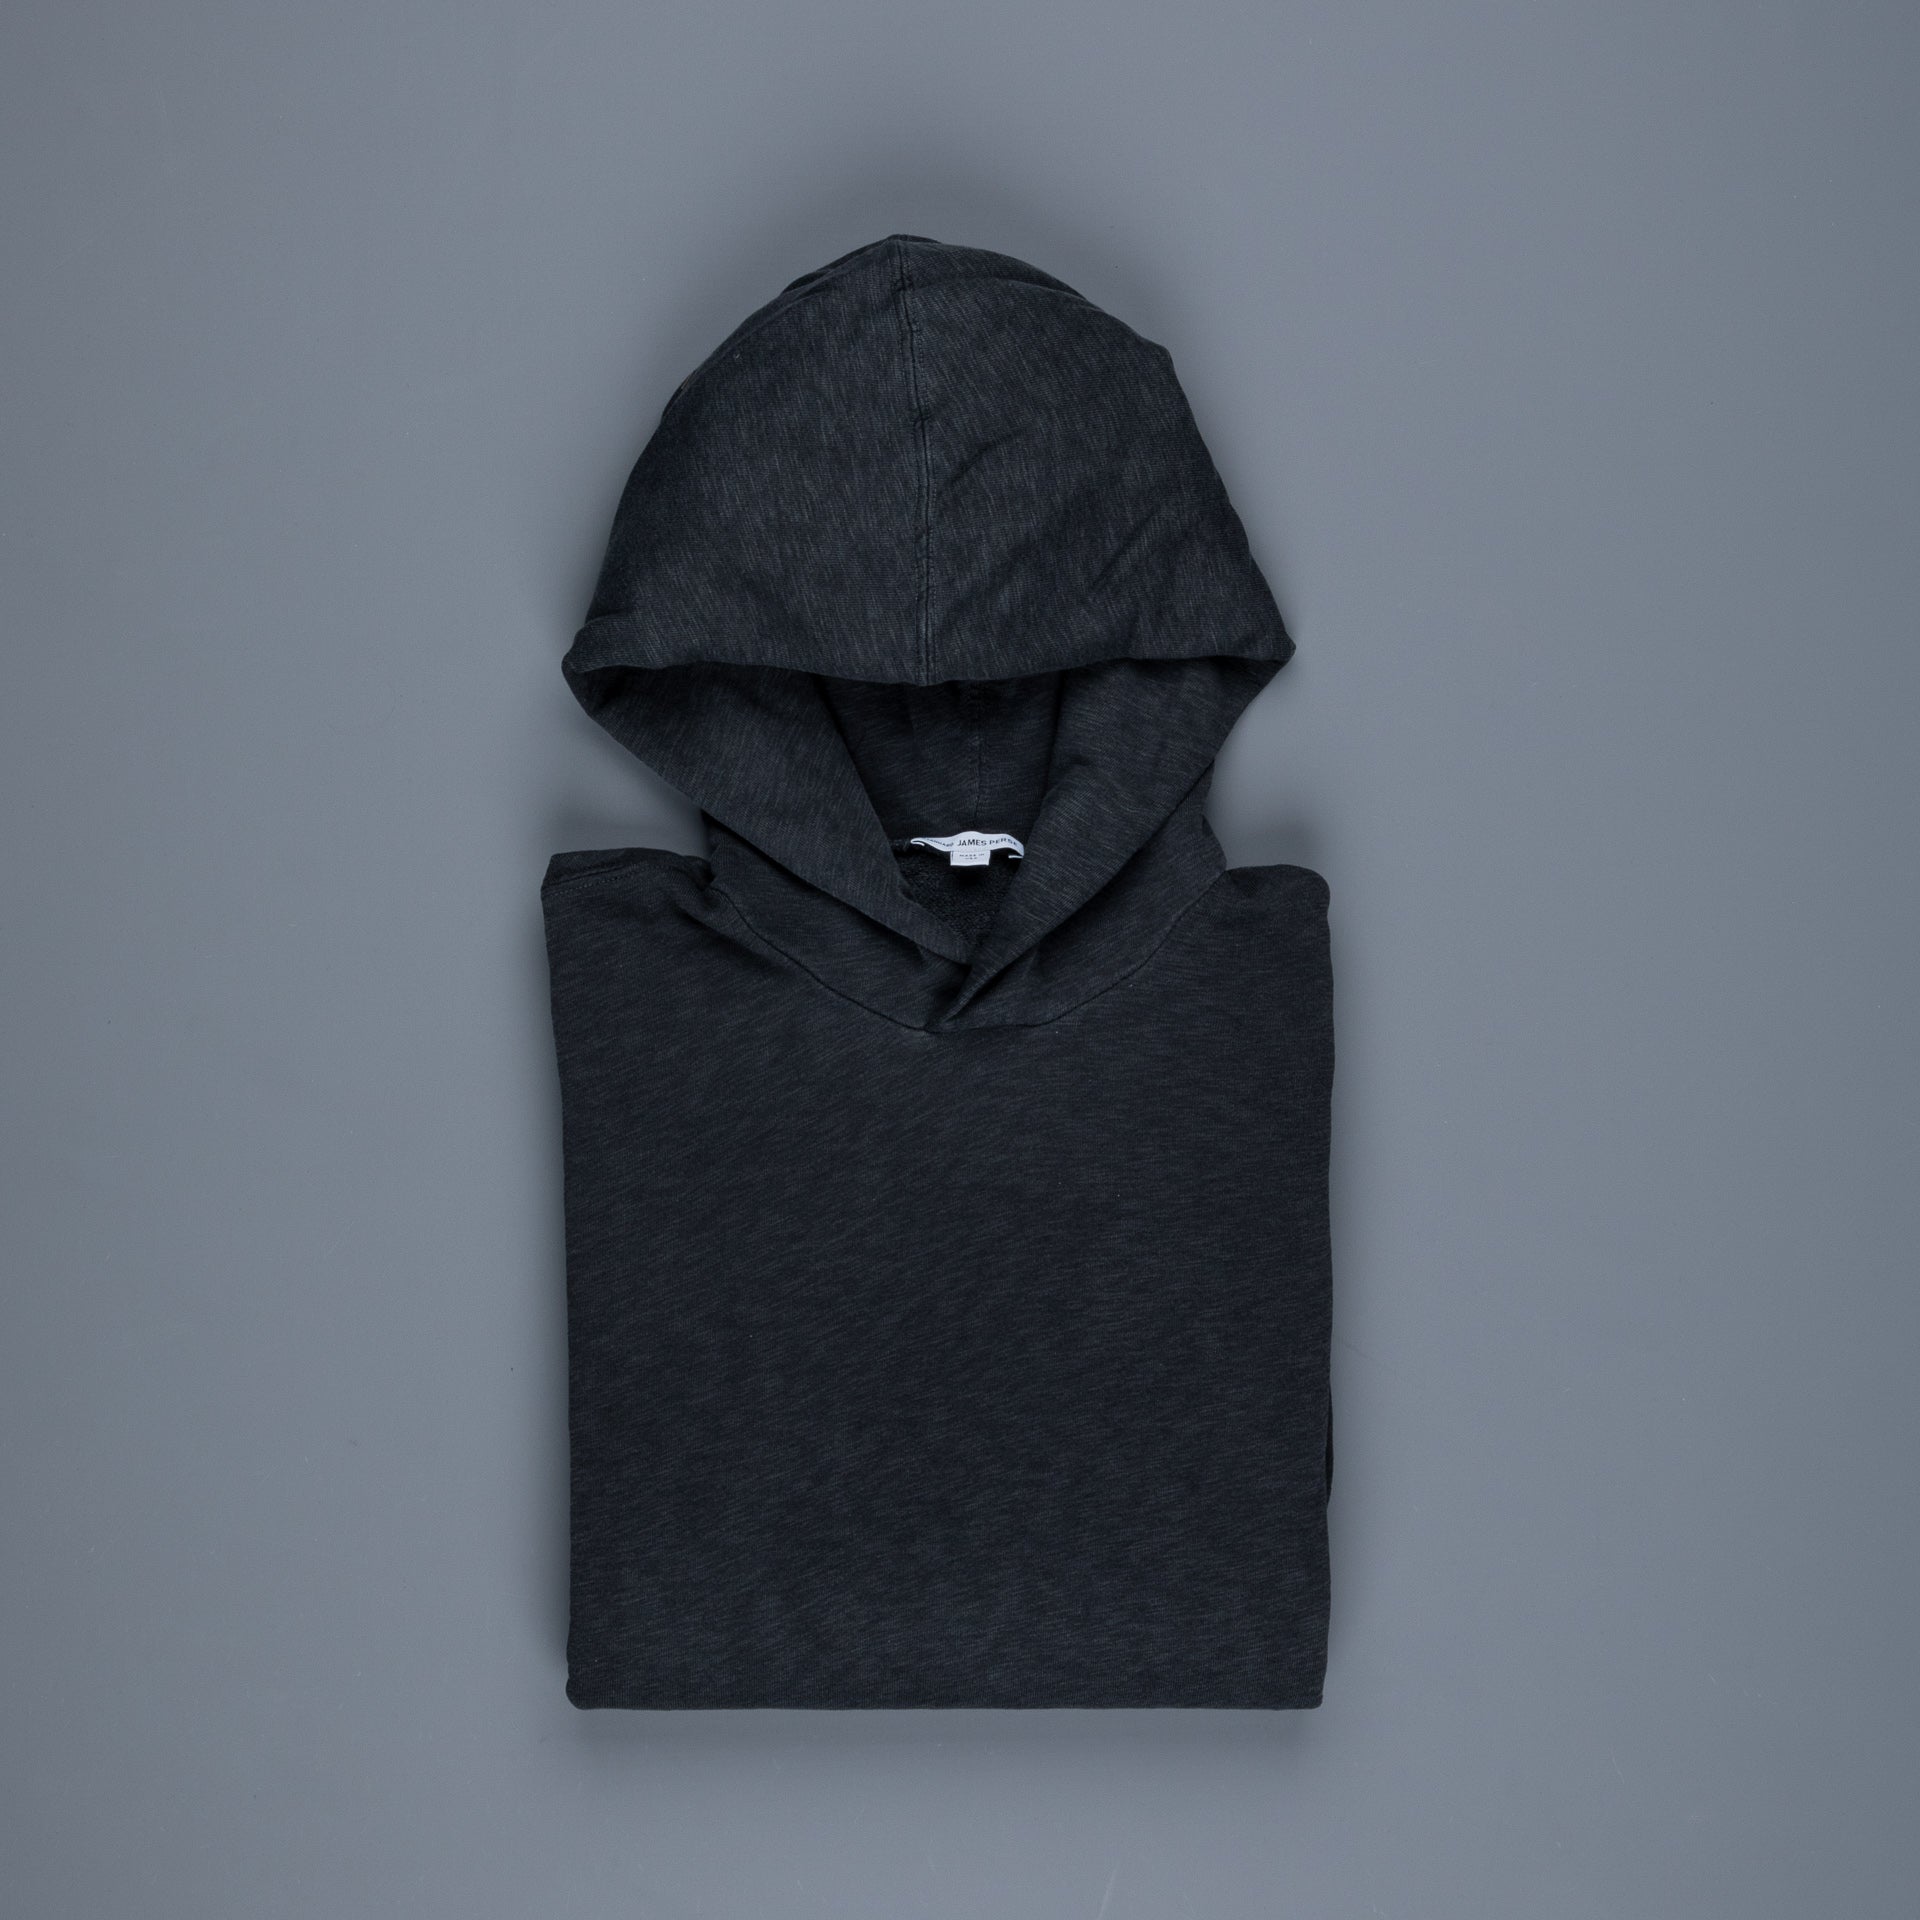 James Perse French Terry Hoodie Carbon